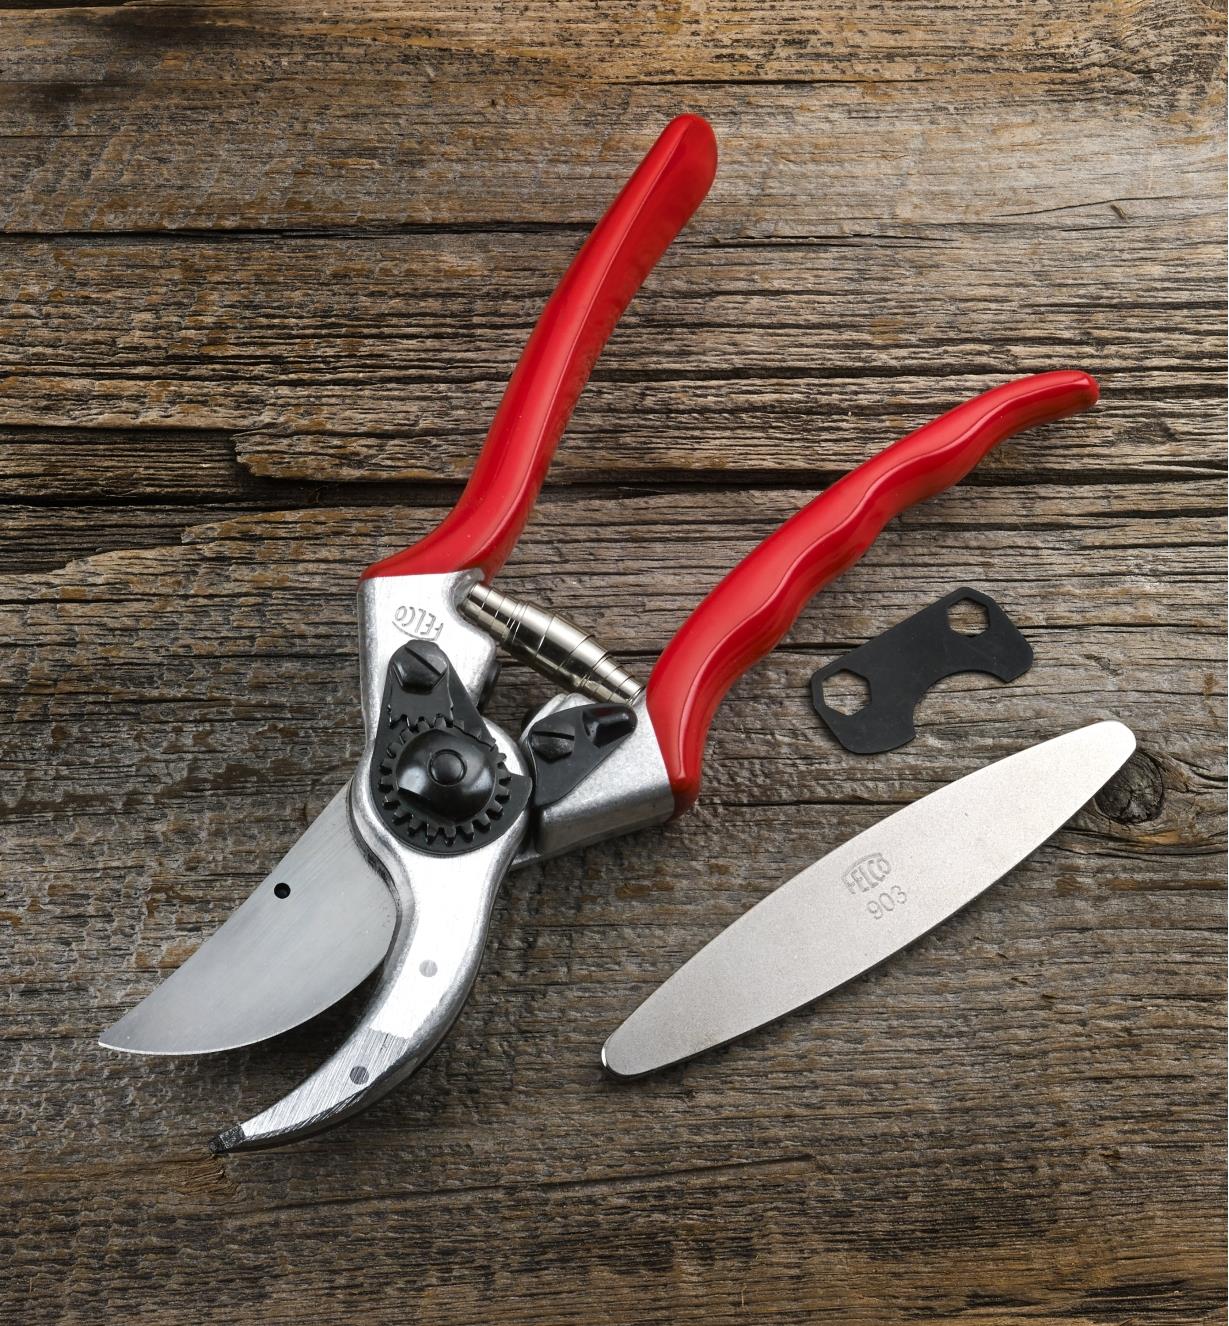 A Felco #2 pruner with the blade sharpener and an included adjustment key